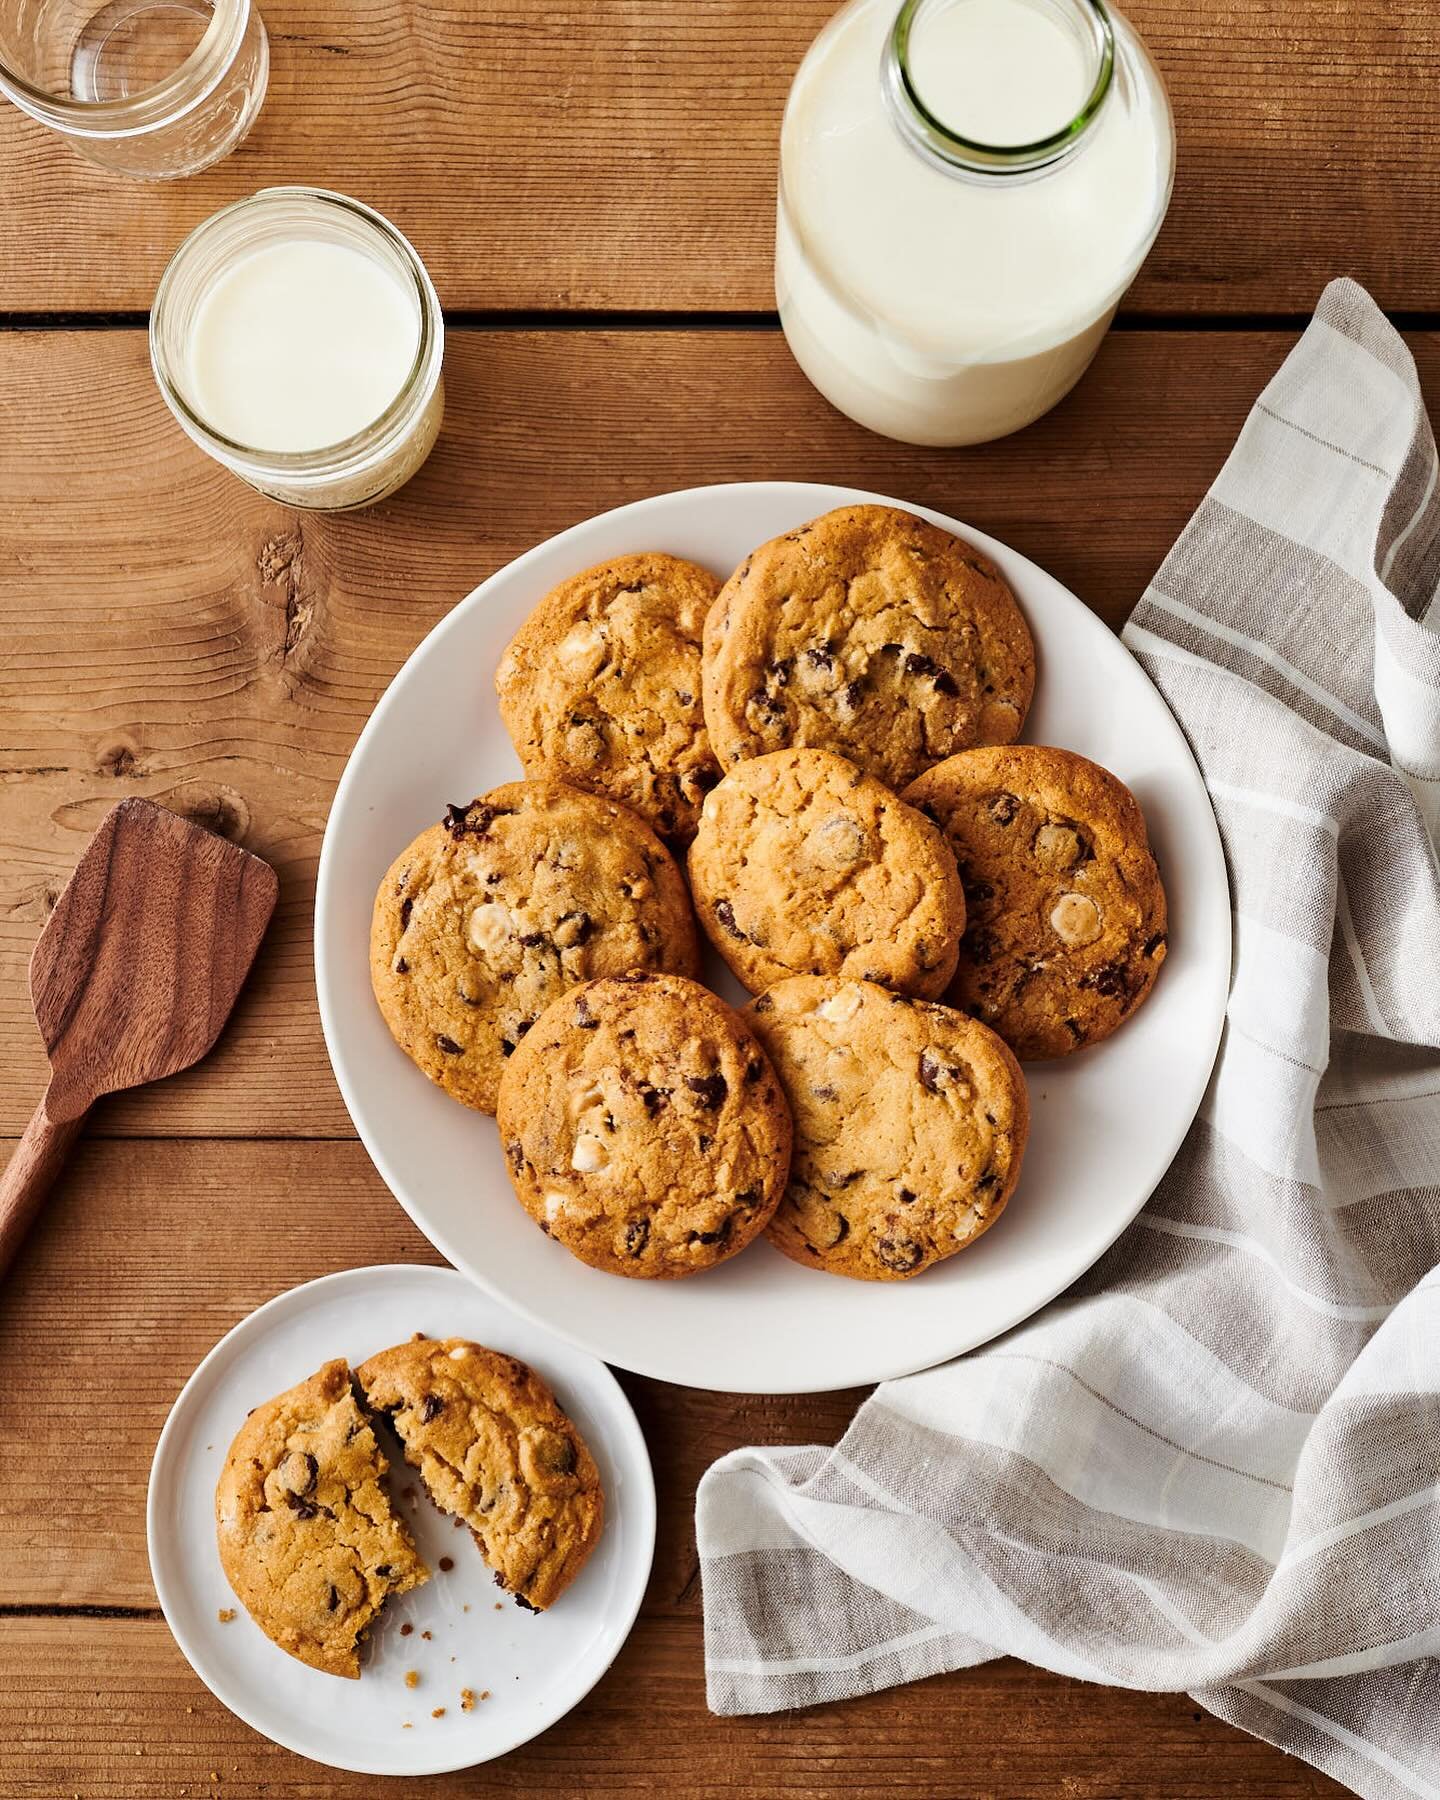 Check out this freshly baked news! 👀🍪

Our founder, Erica Davis, shares her famous, homemade chocolate chip cookie recipe in the newest issue of @simplybuckhead Magazine! 

Find the link to the recipe in our bio! 🔗

Whip up a batch today or find R